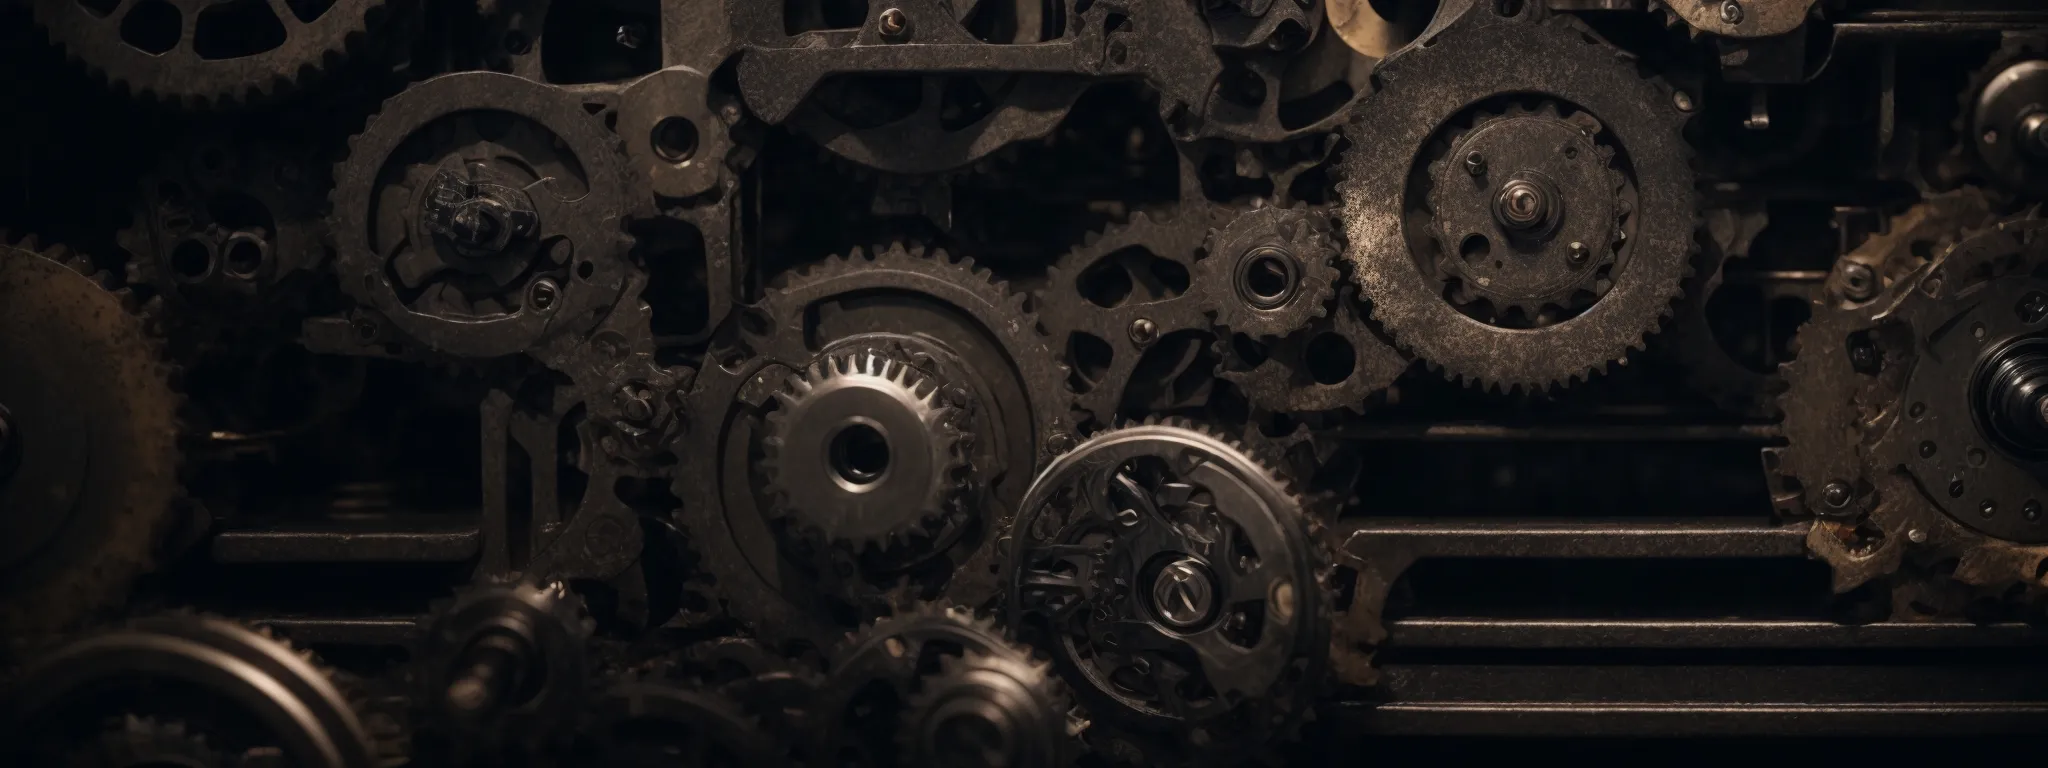 gears meshing seamlessly amid industrial machinery, symbolizing the integration of seo in the industrial market's digital strategy.